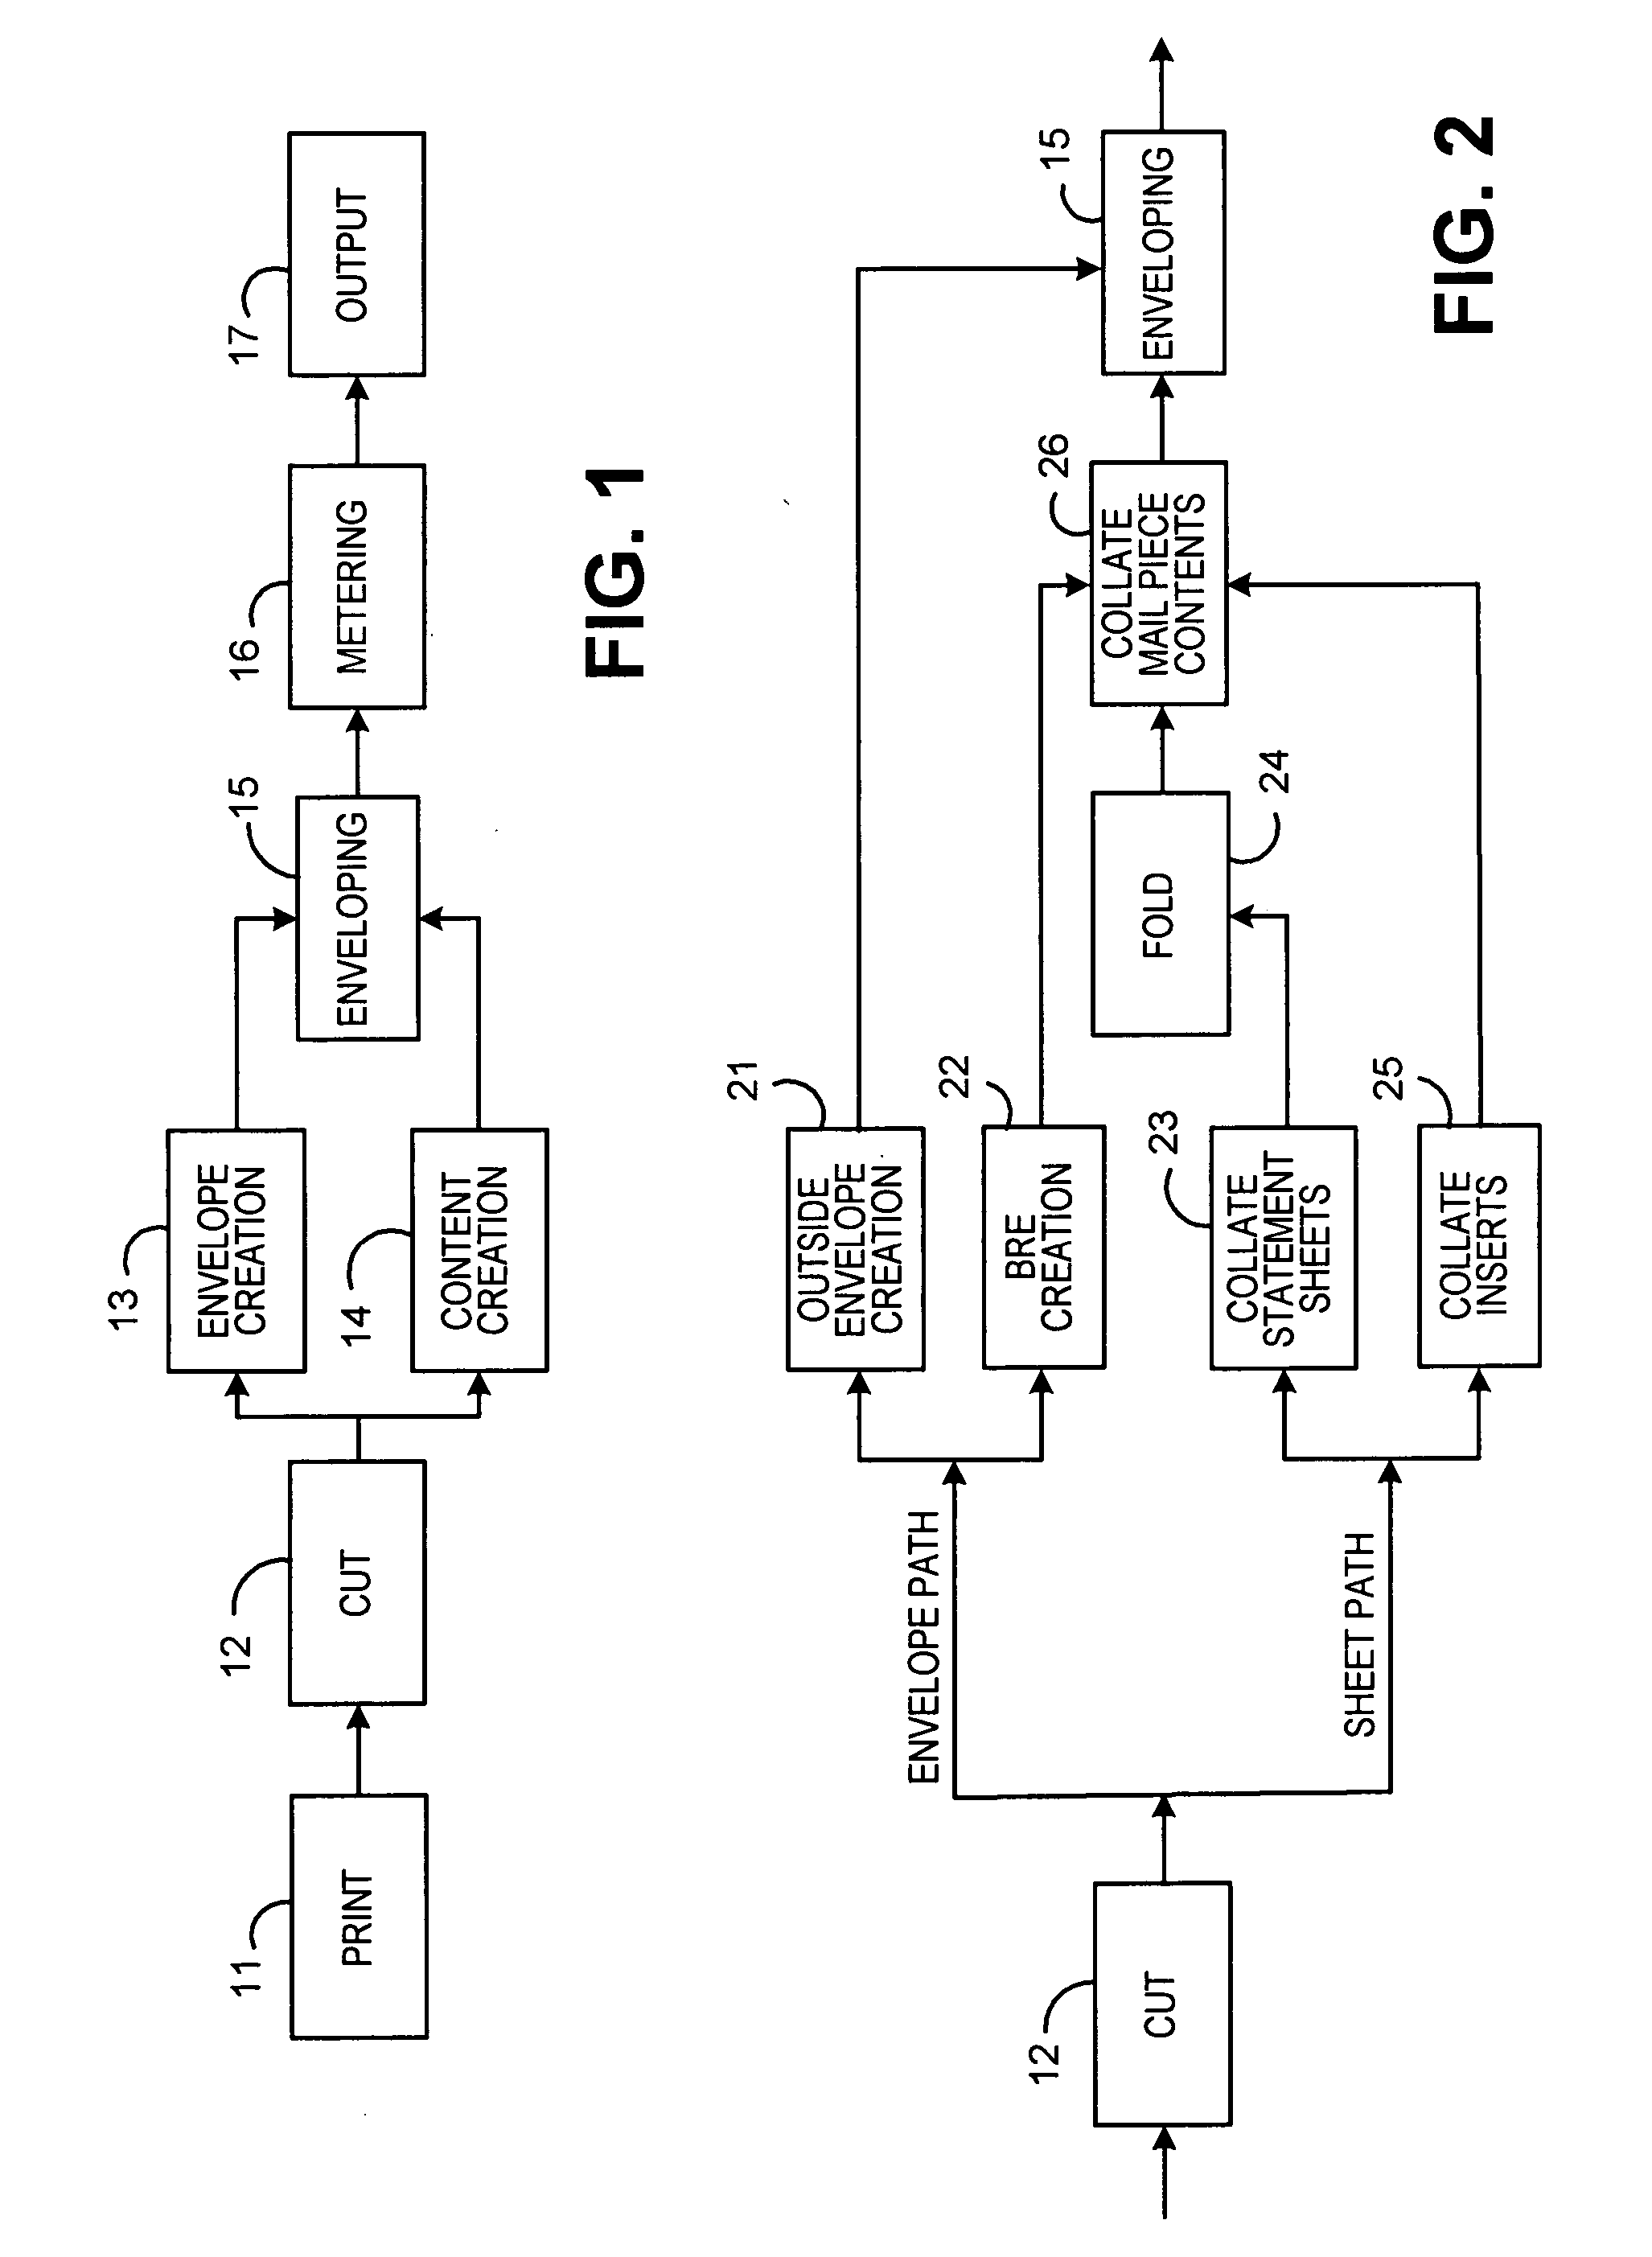 Method for creating a single continuous web from which to fabricate mailpieces